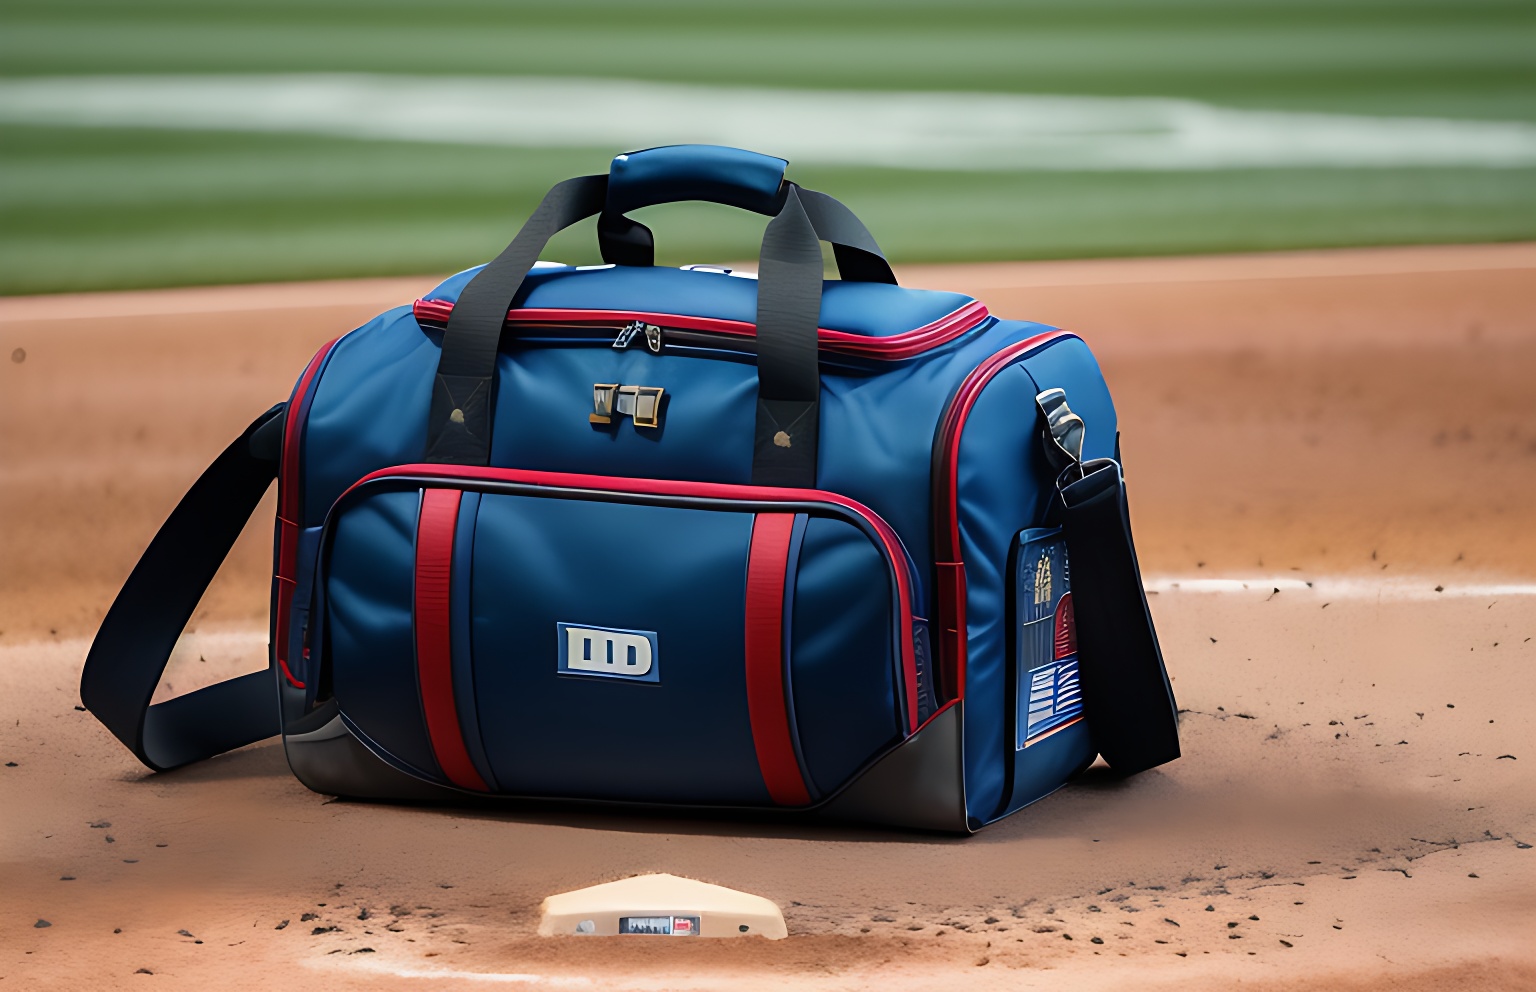 What Kind of Bags Are Allowed in Nationals Baseball Games?